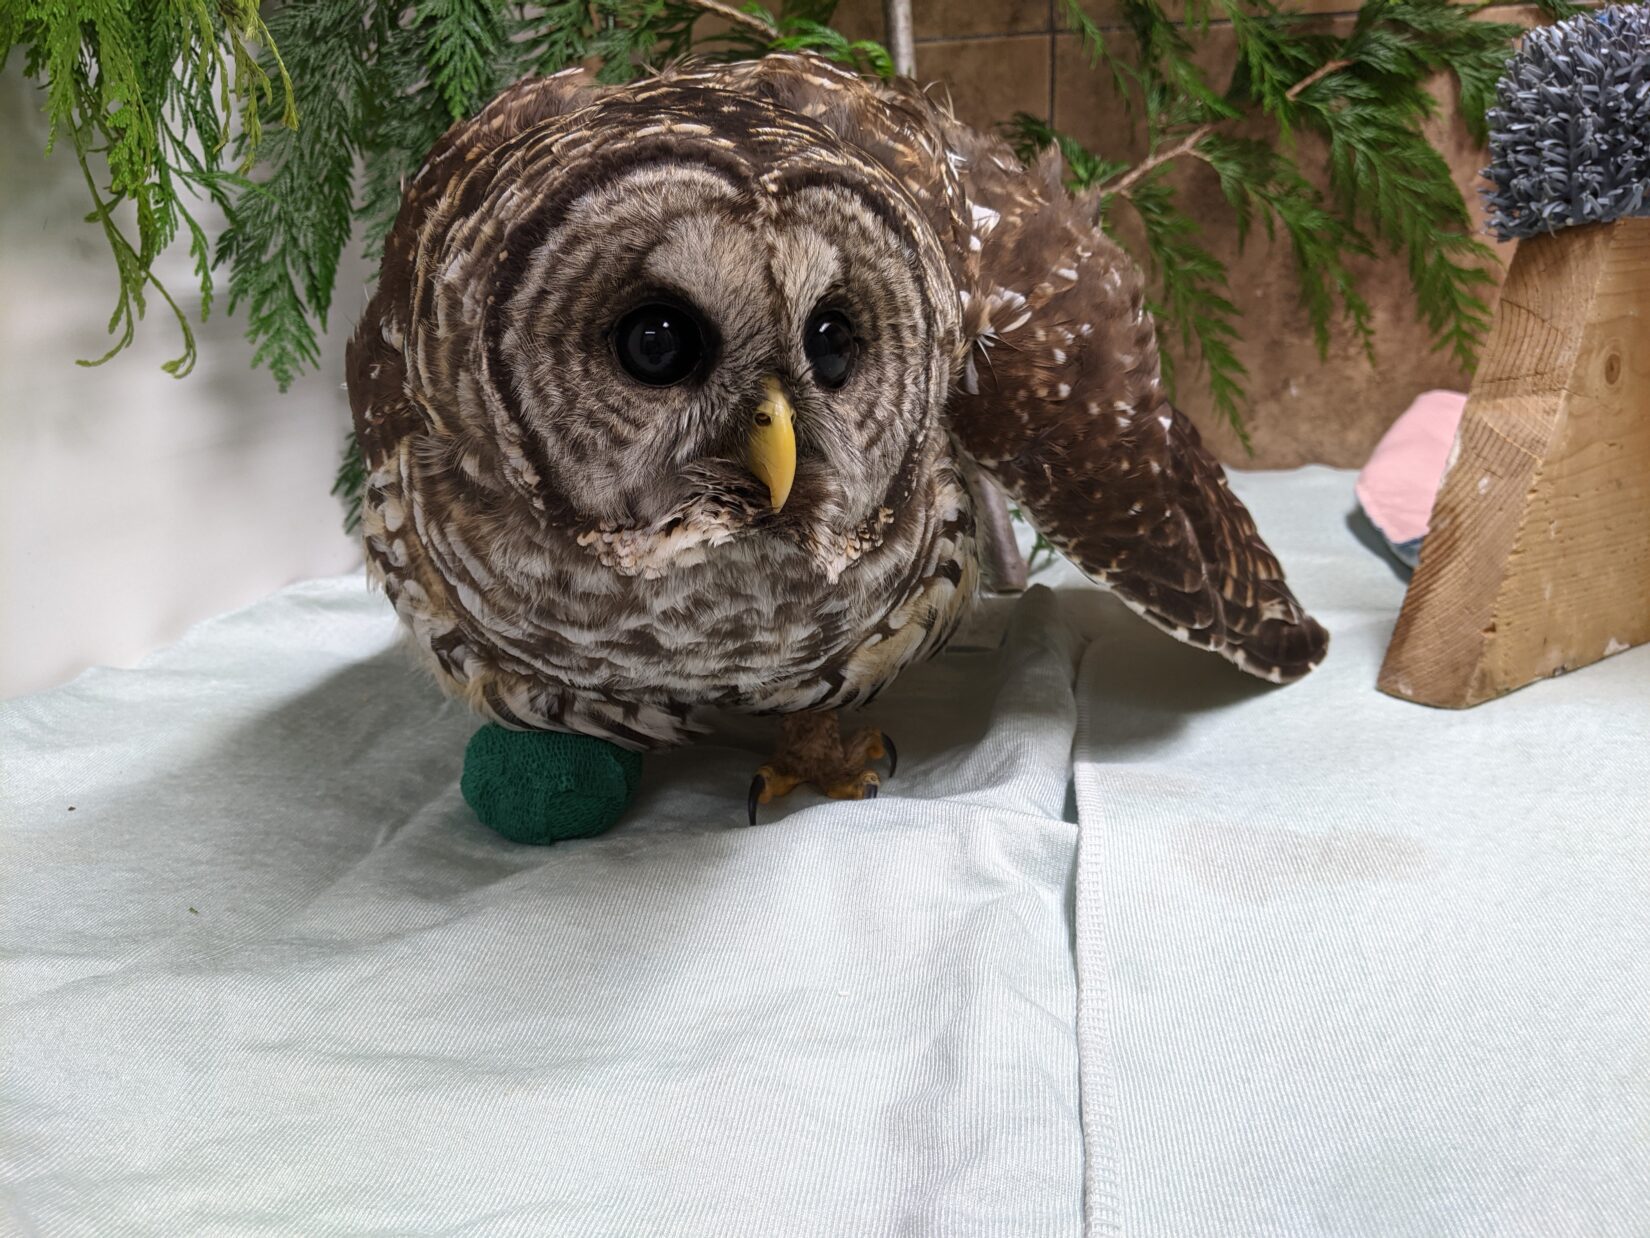 Barred owl with a green cast on their foot